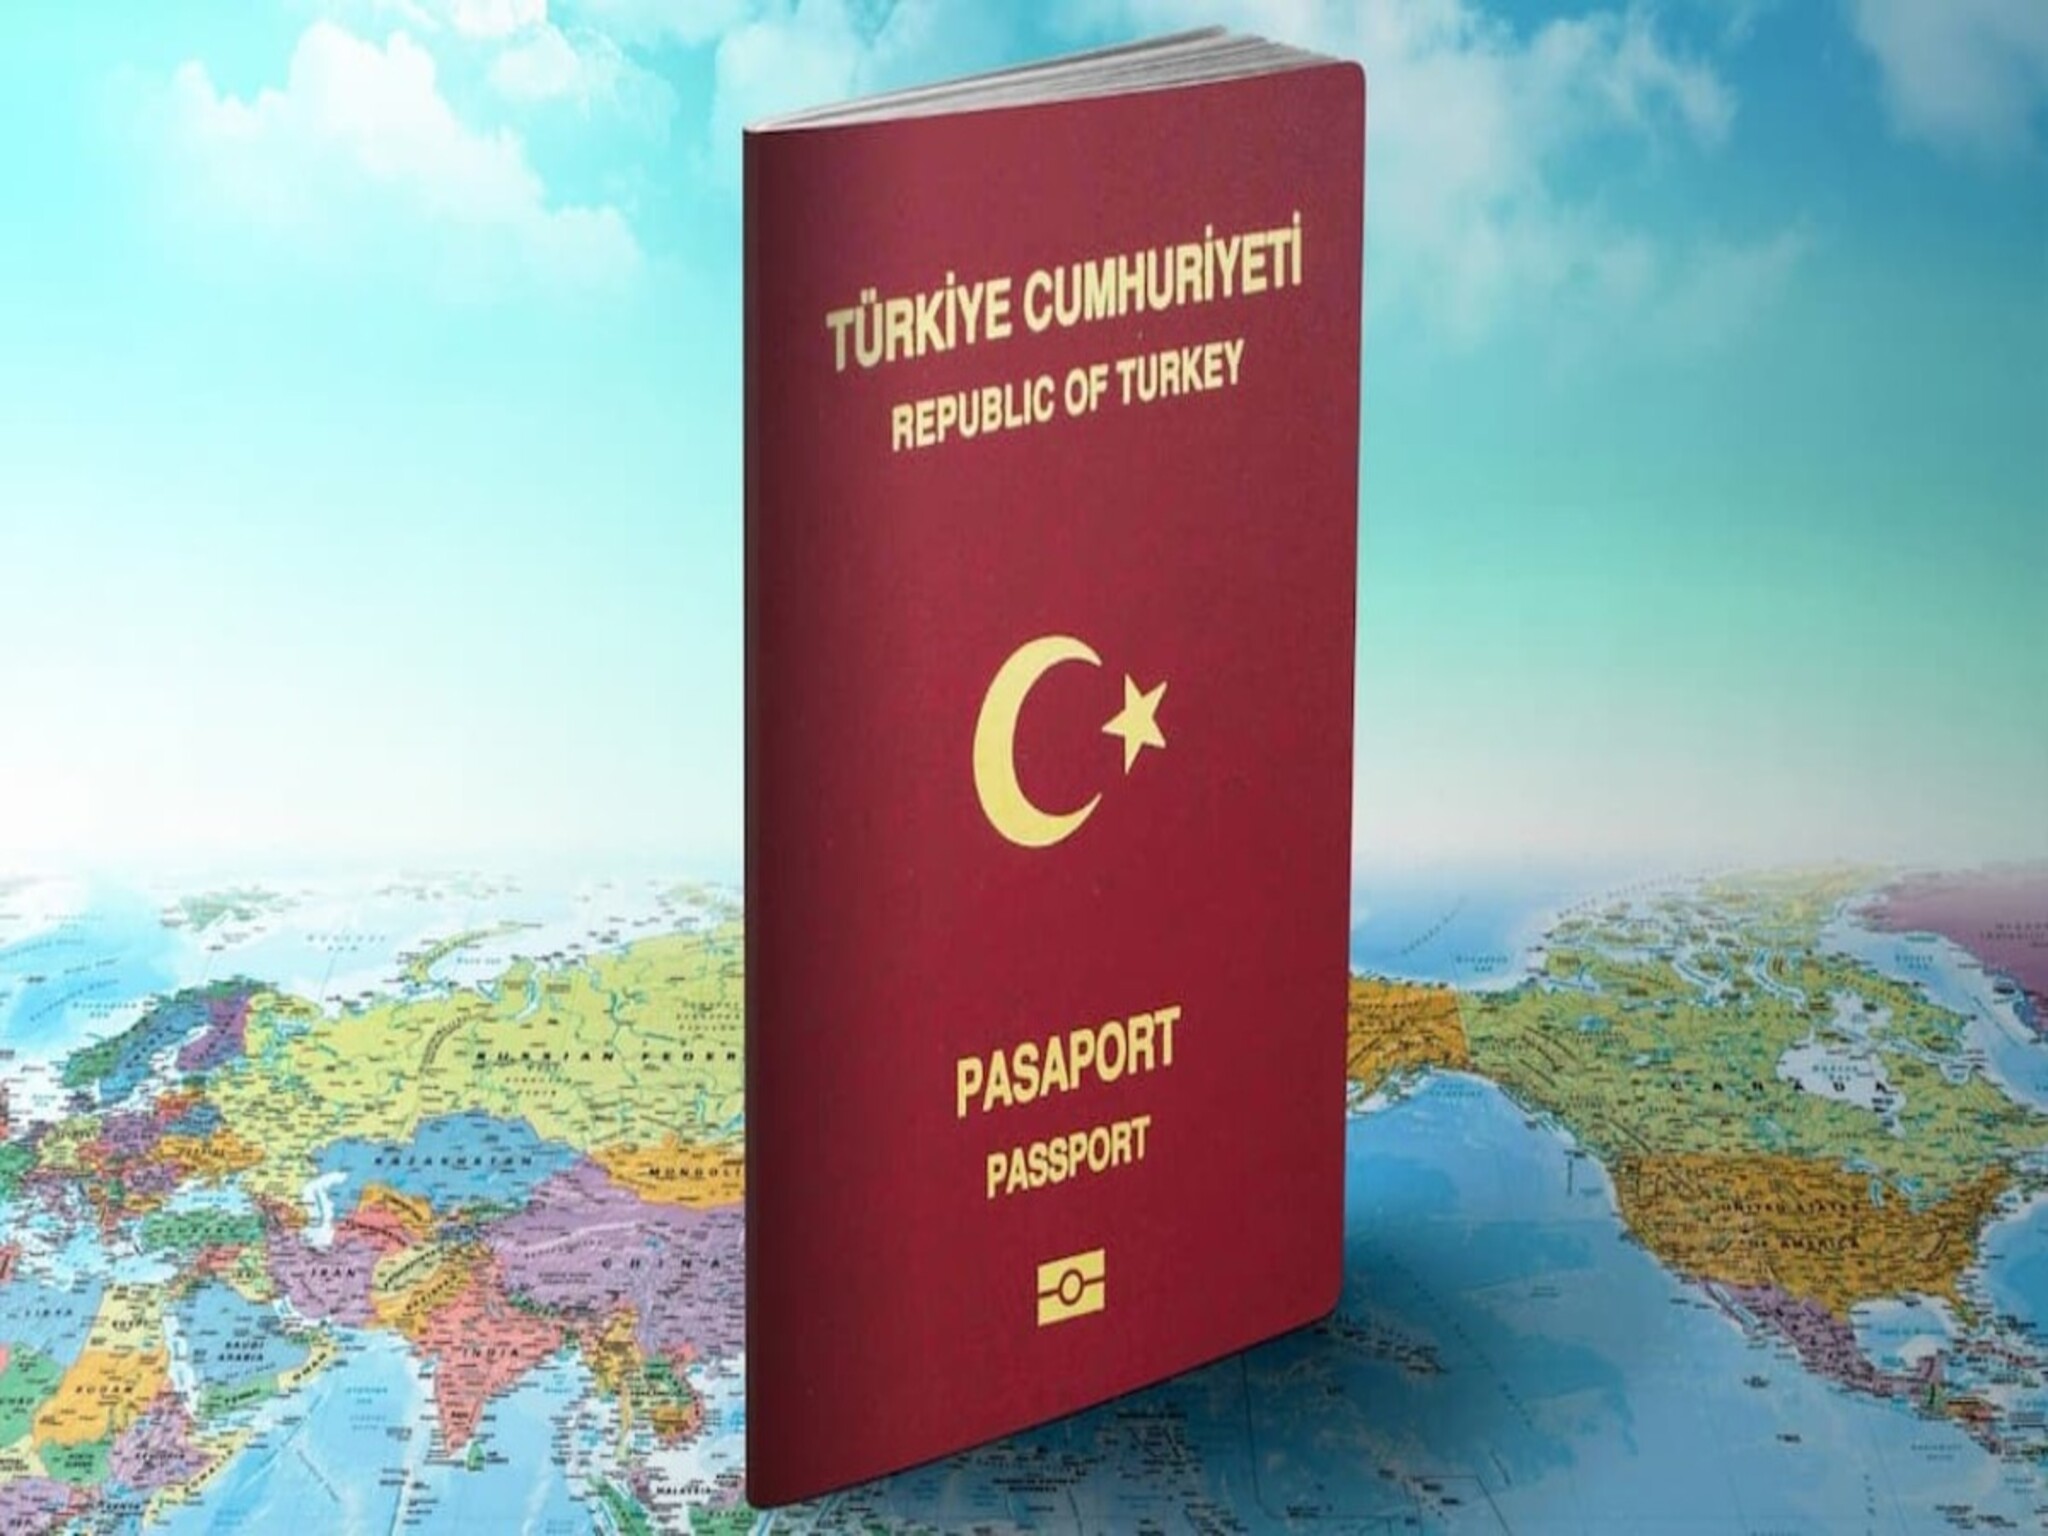 How to obtain Turkish citizenship in exchange for investment